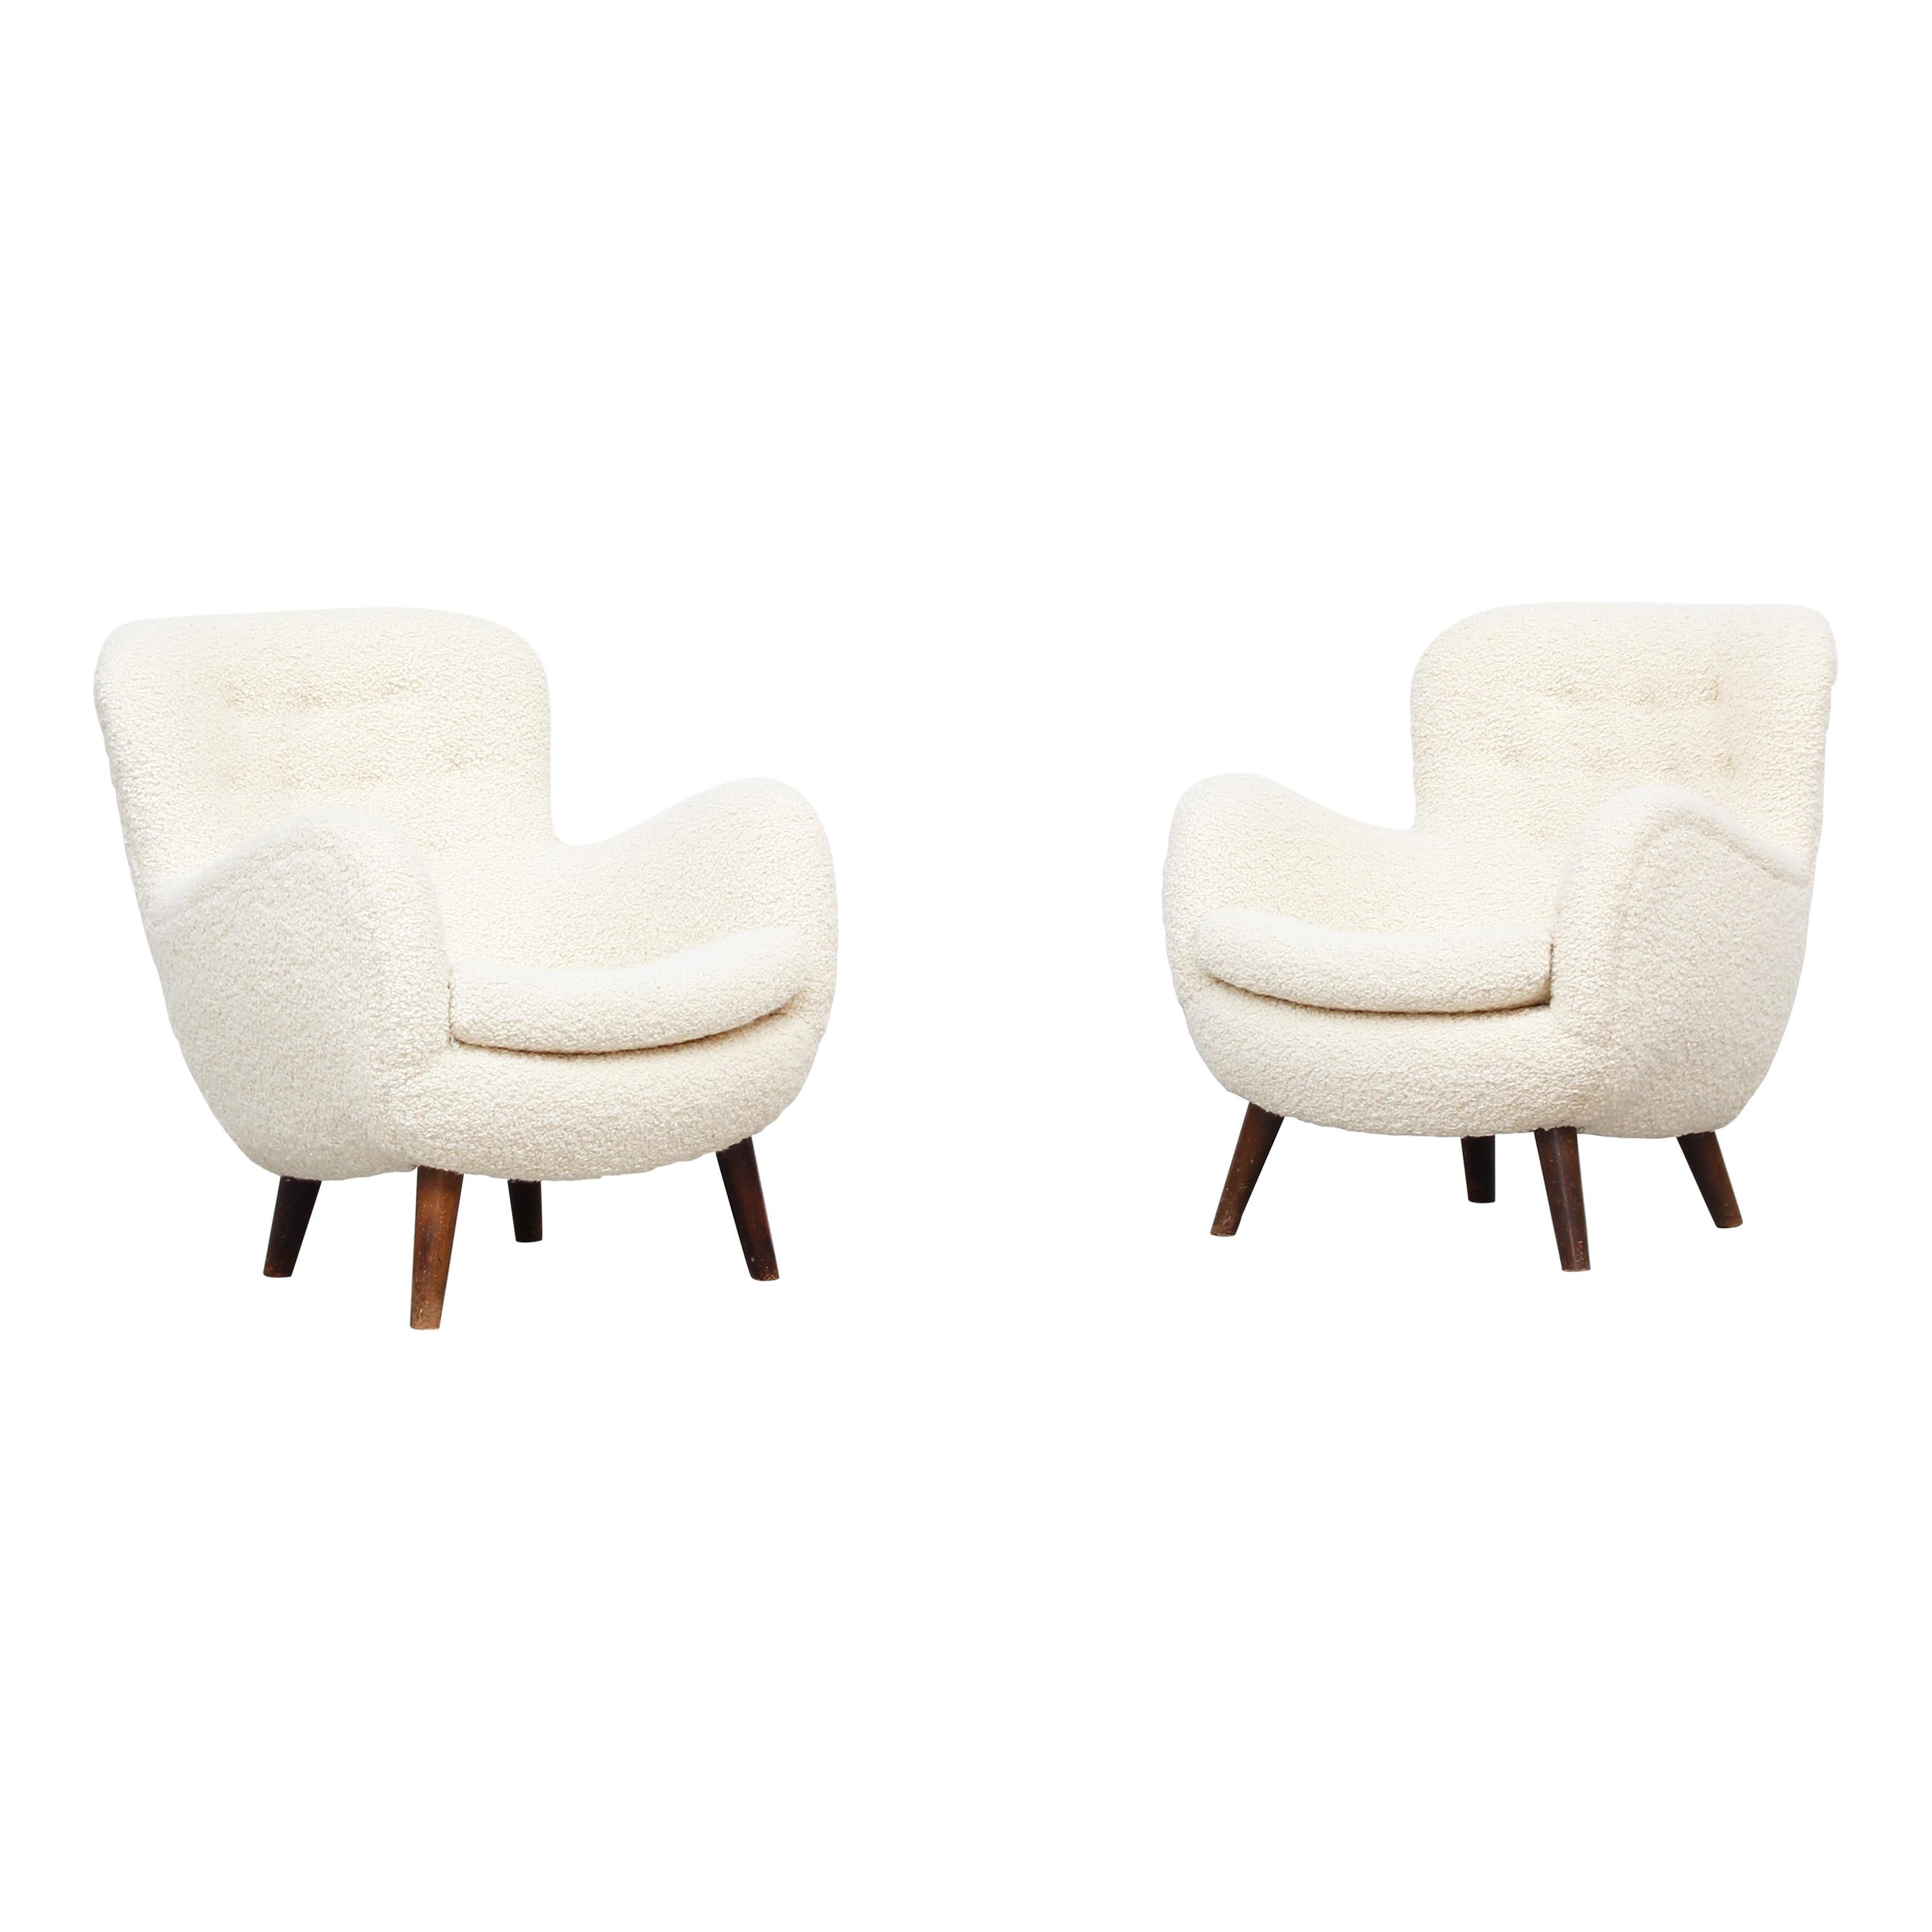 Beautiful Pair of Danish Lounge Chairs, Frits Schlegel Attributed, Denmark, 1940